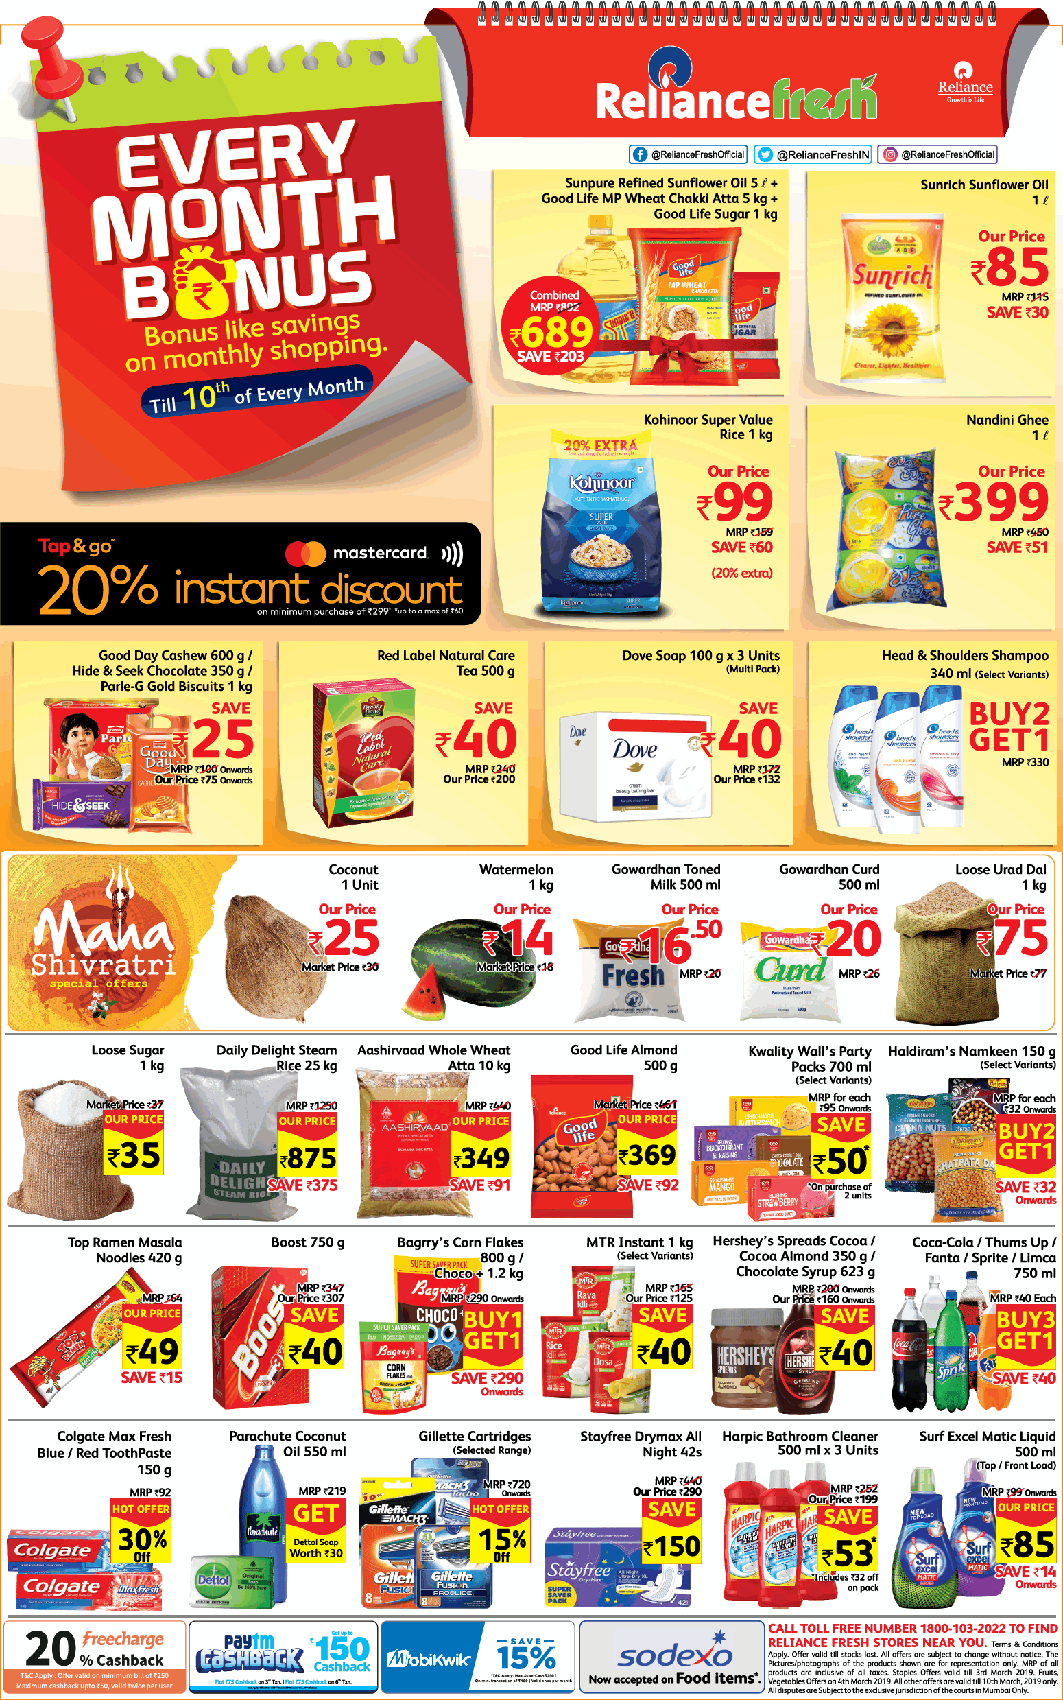 reliance-fresh-every-month-bonus-20%-instant-discount-ad-bangalore-times-02-03-2019.png